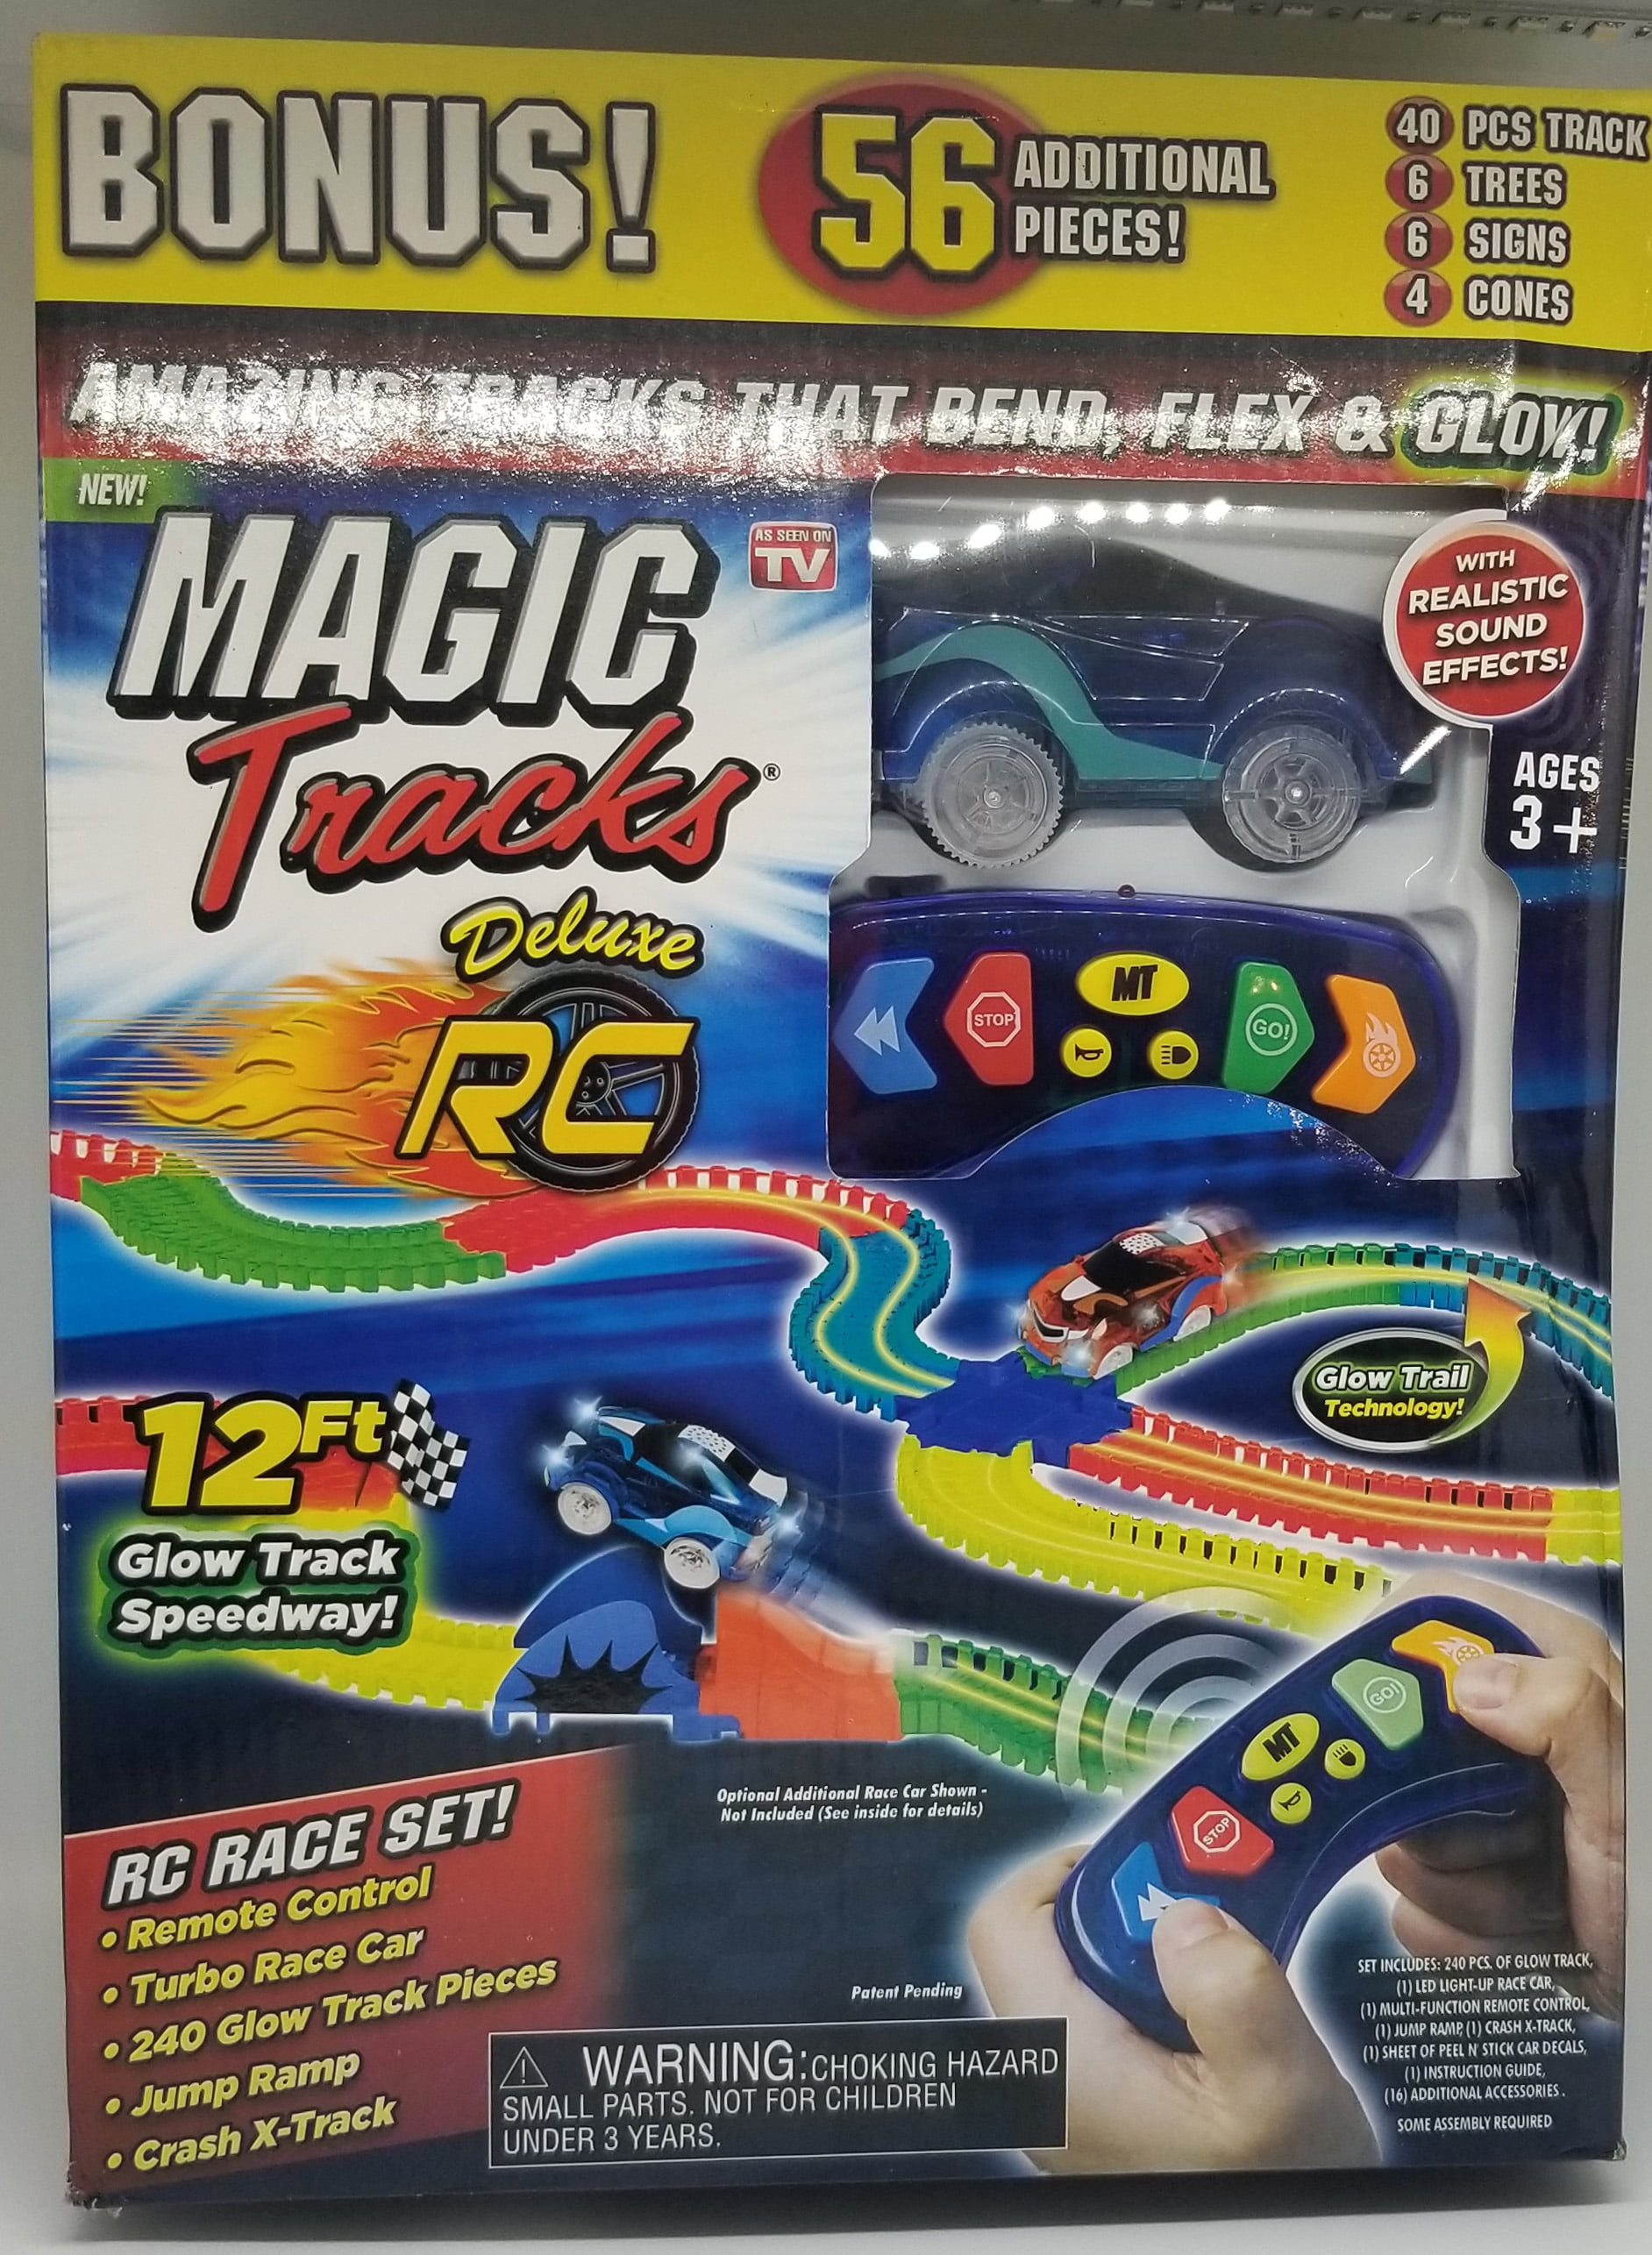 Ontel Magic Tracks Mega RC with 2 Remote Control Turbo Race Cars and 16 ft of 